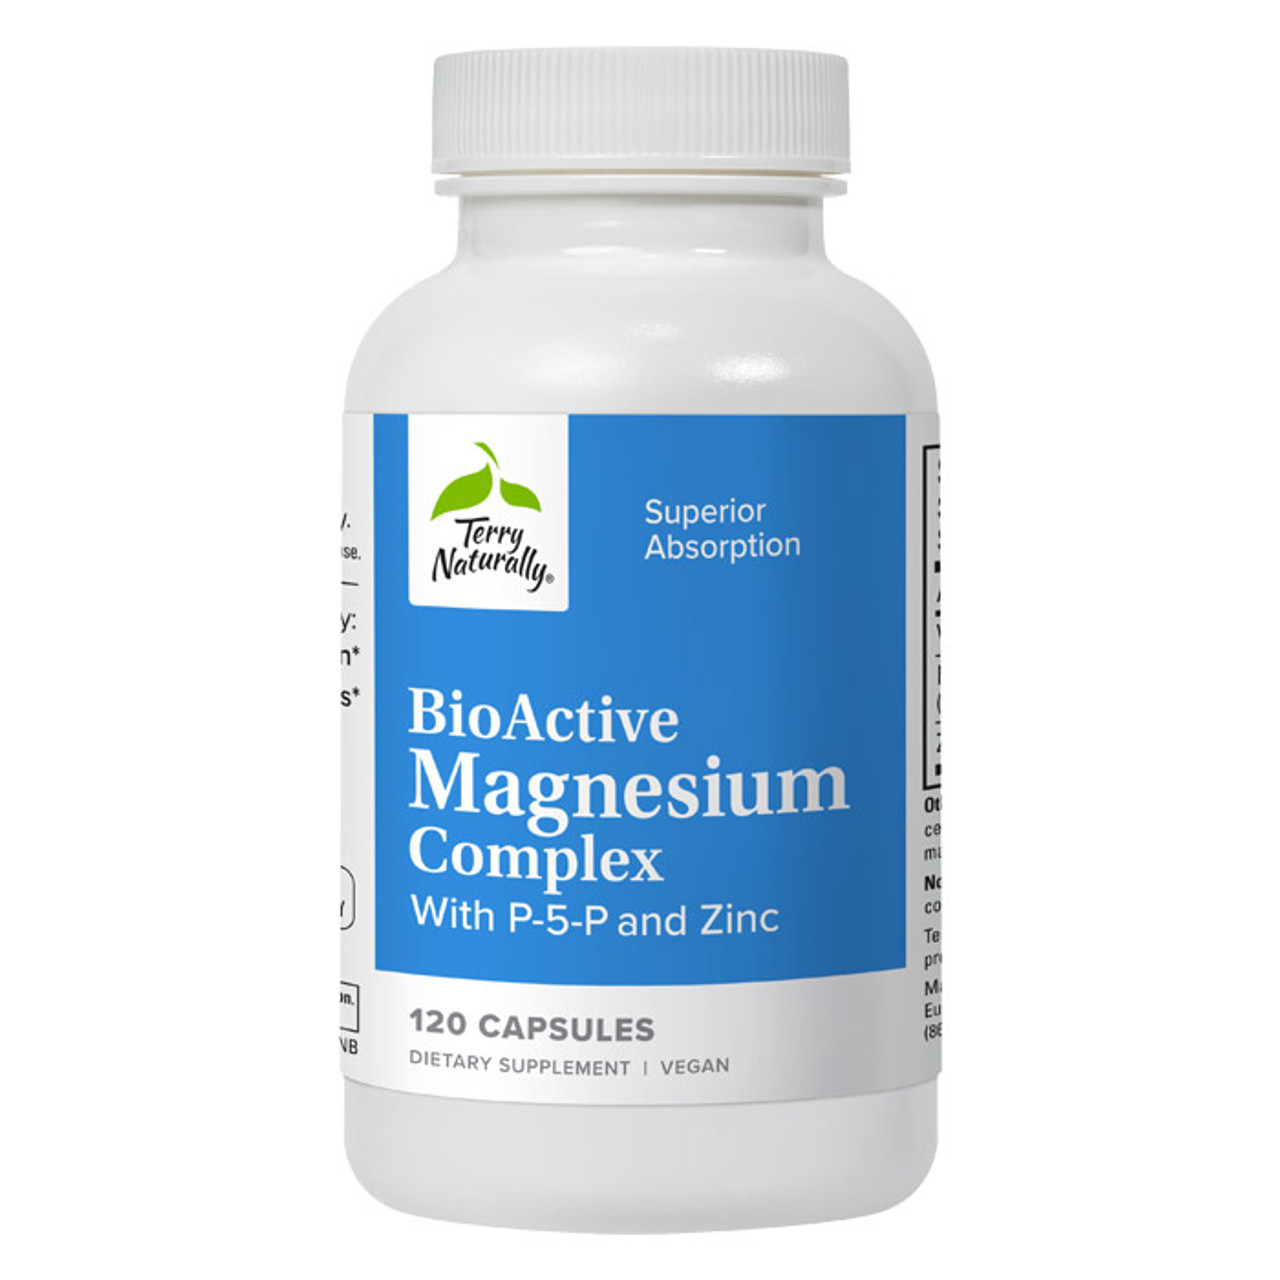 Terry Naturally BioActive Magnesium Complex picture of product bottle